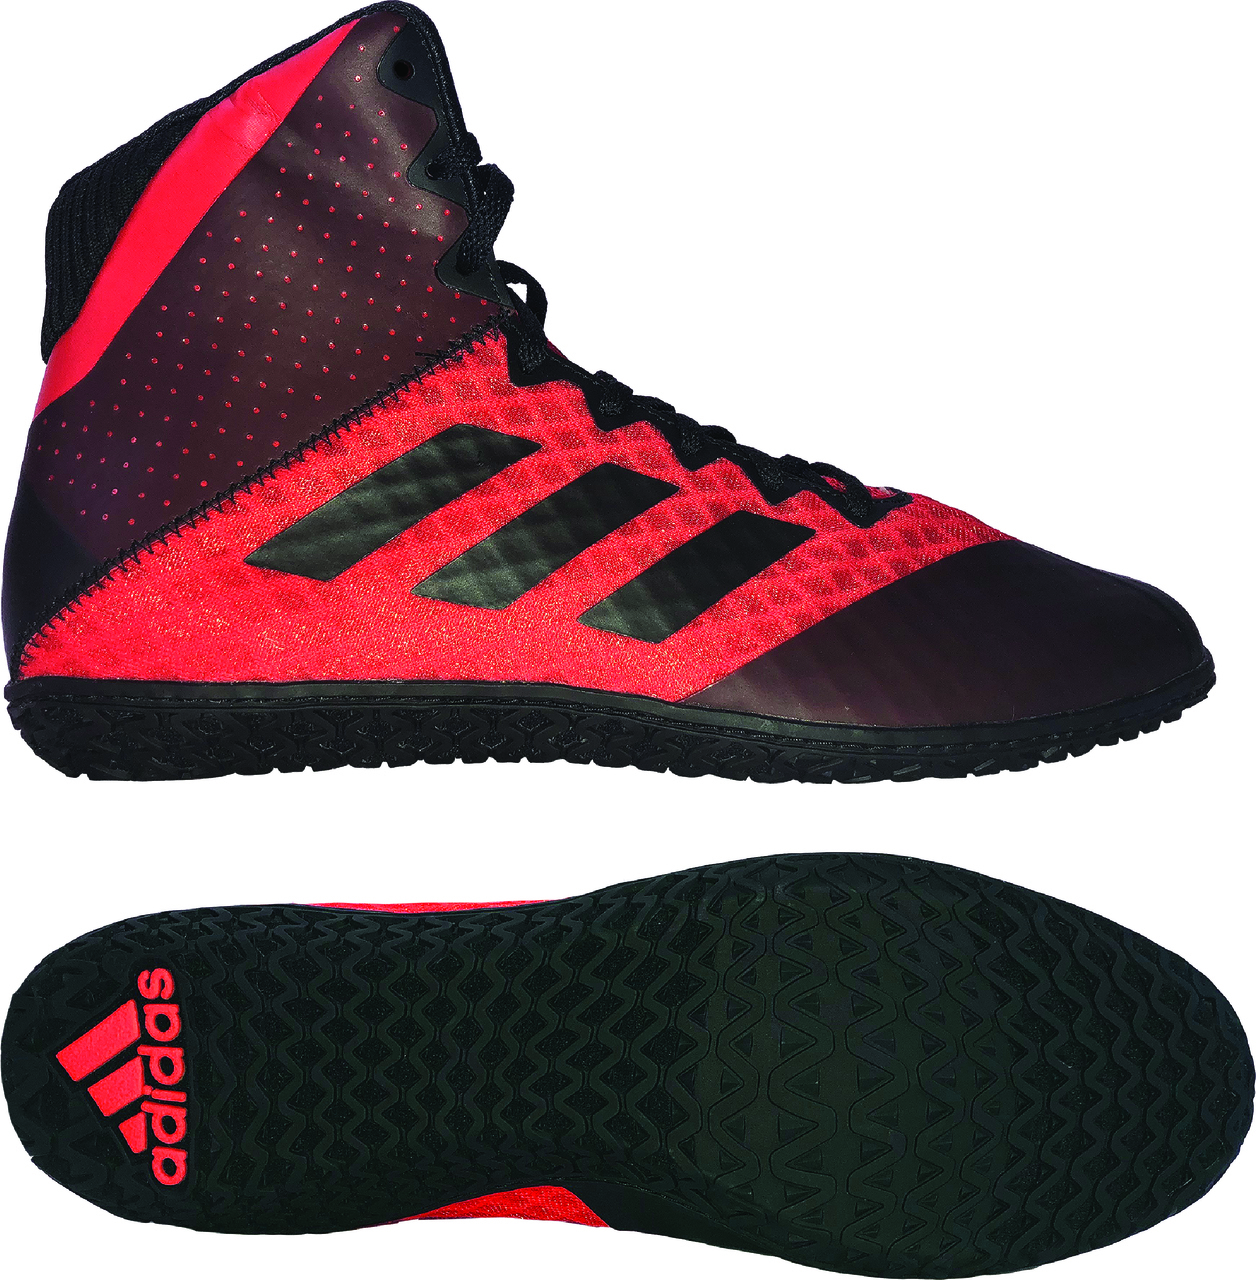 https://www.wrestling-central.net/images/shoes/adidas_BC0532_Mat%20Wizard%204_red_black.jpg